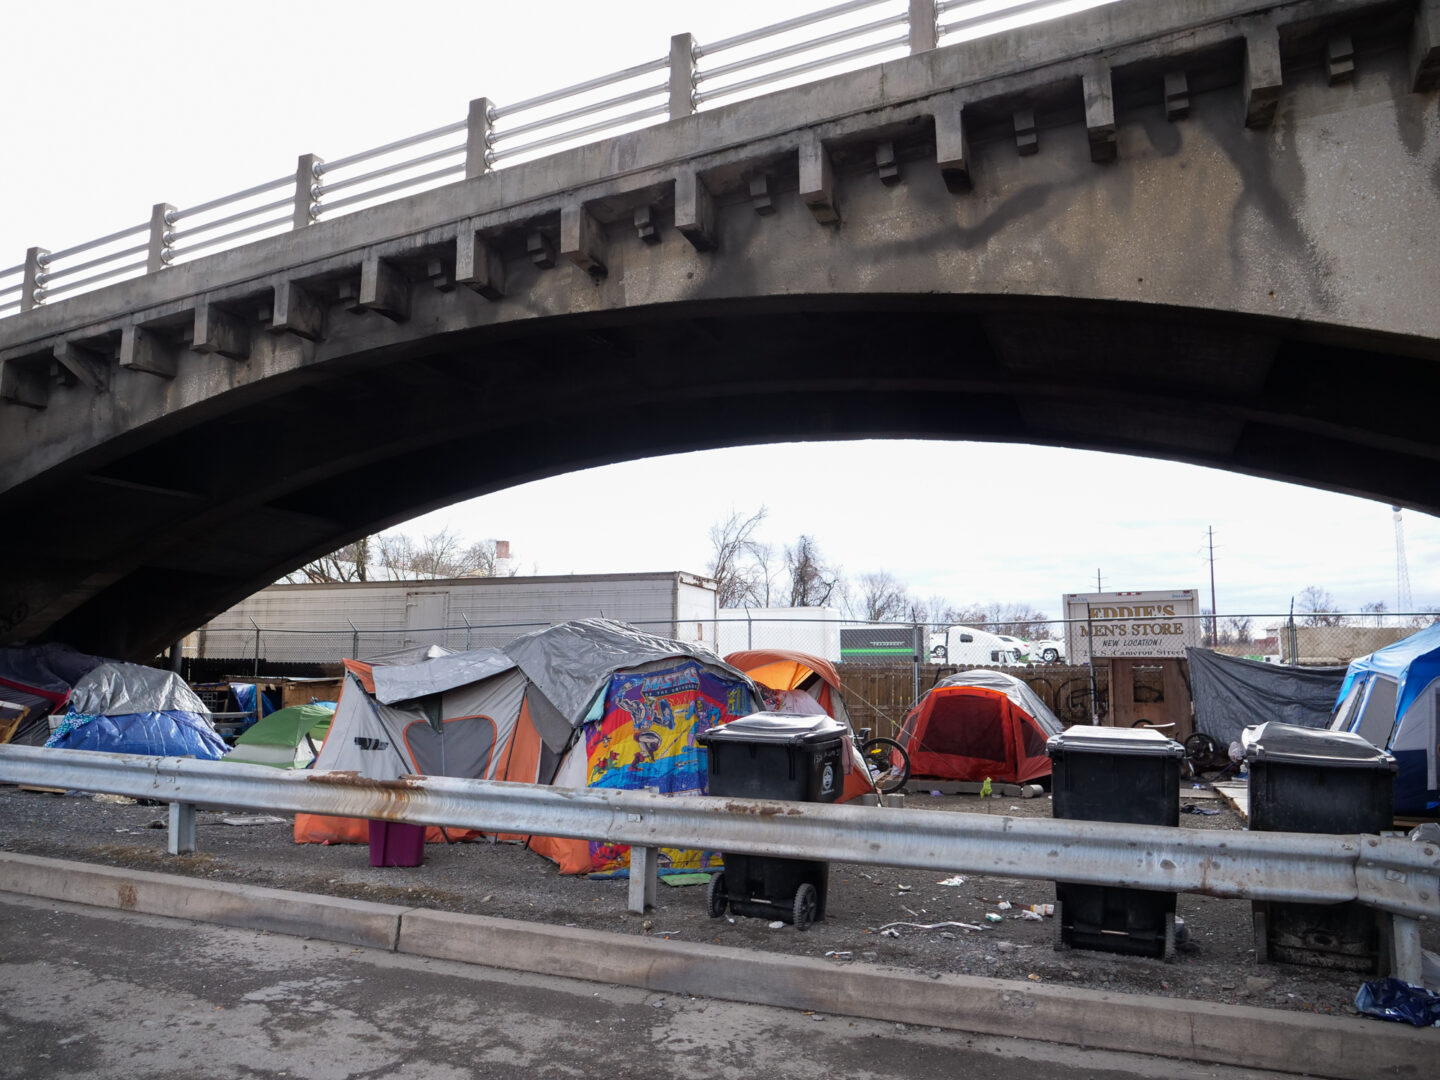 Harrisburg officials have declared the encampment under the Mulberry Street bridge a danger and is forcing all the people living there to move out so it can be cleaned.